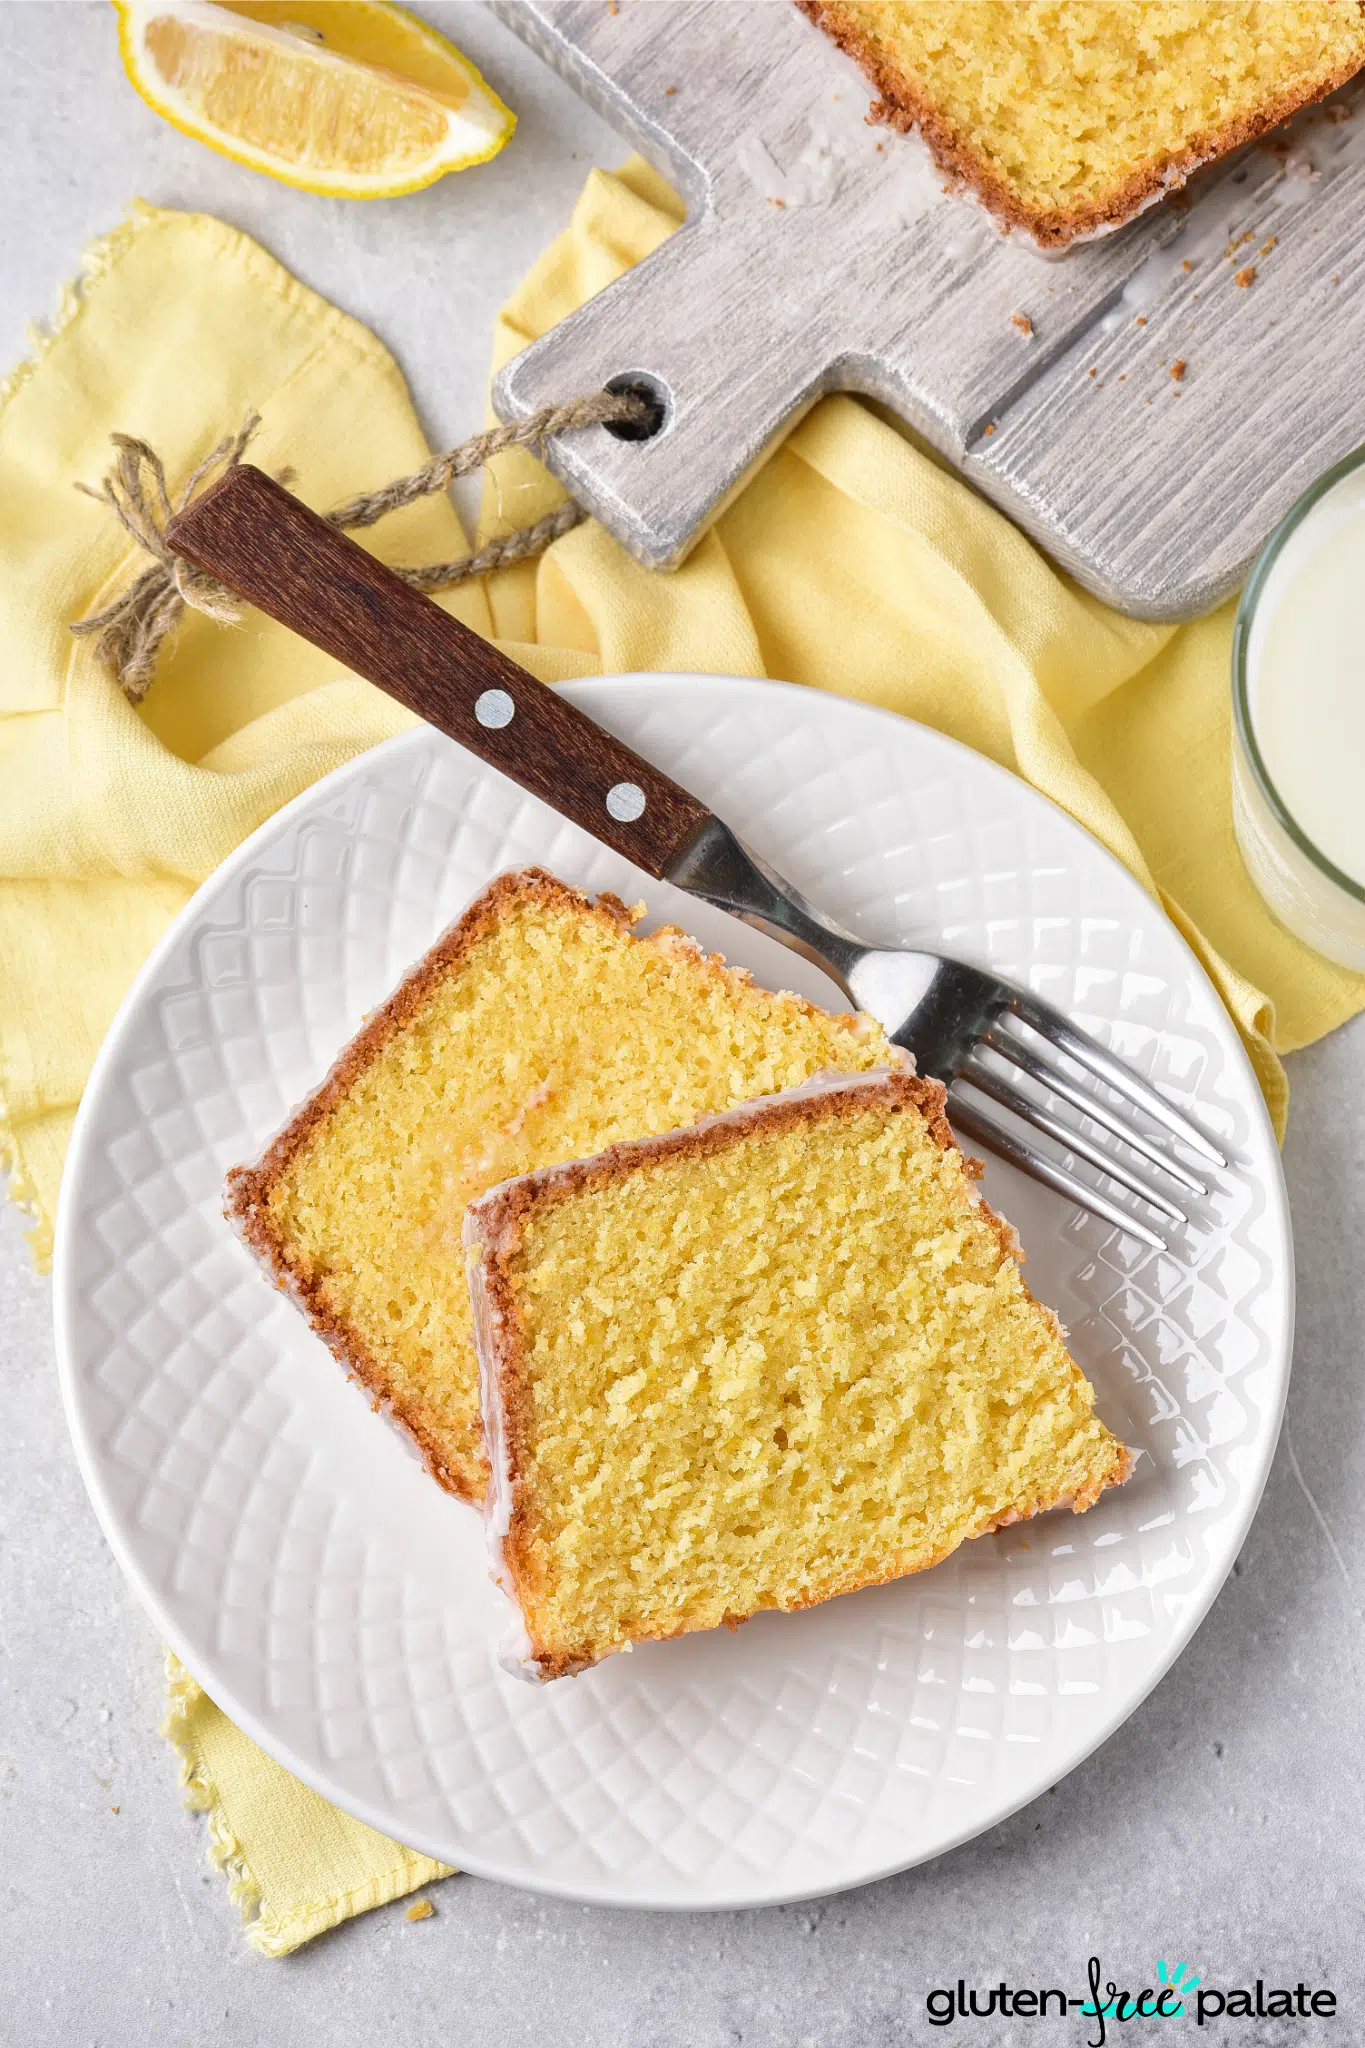 Gluten-free lemon drizzle cake on a white serving plate.